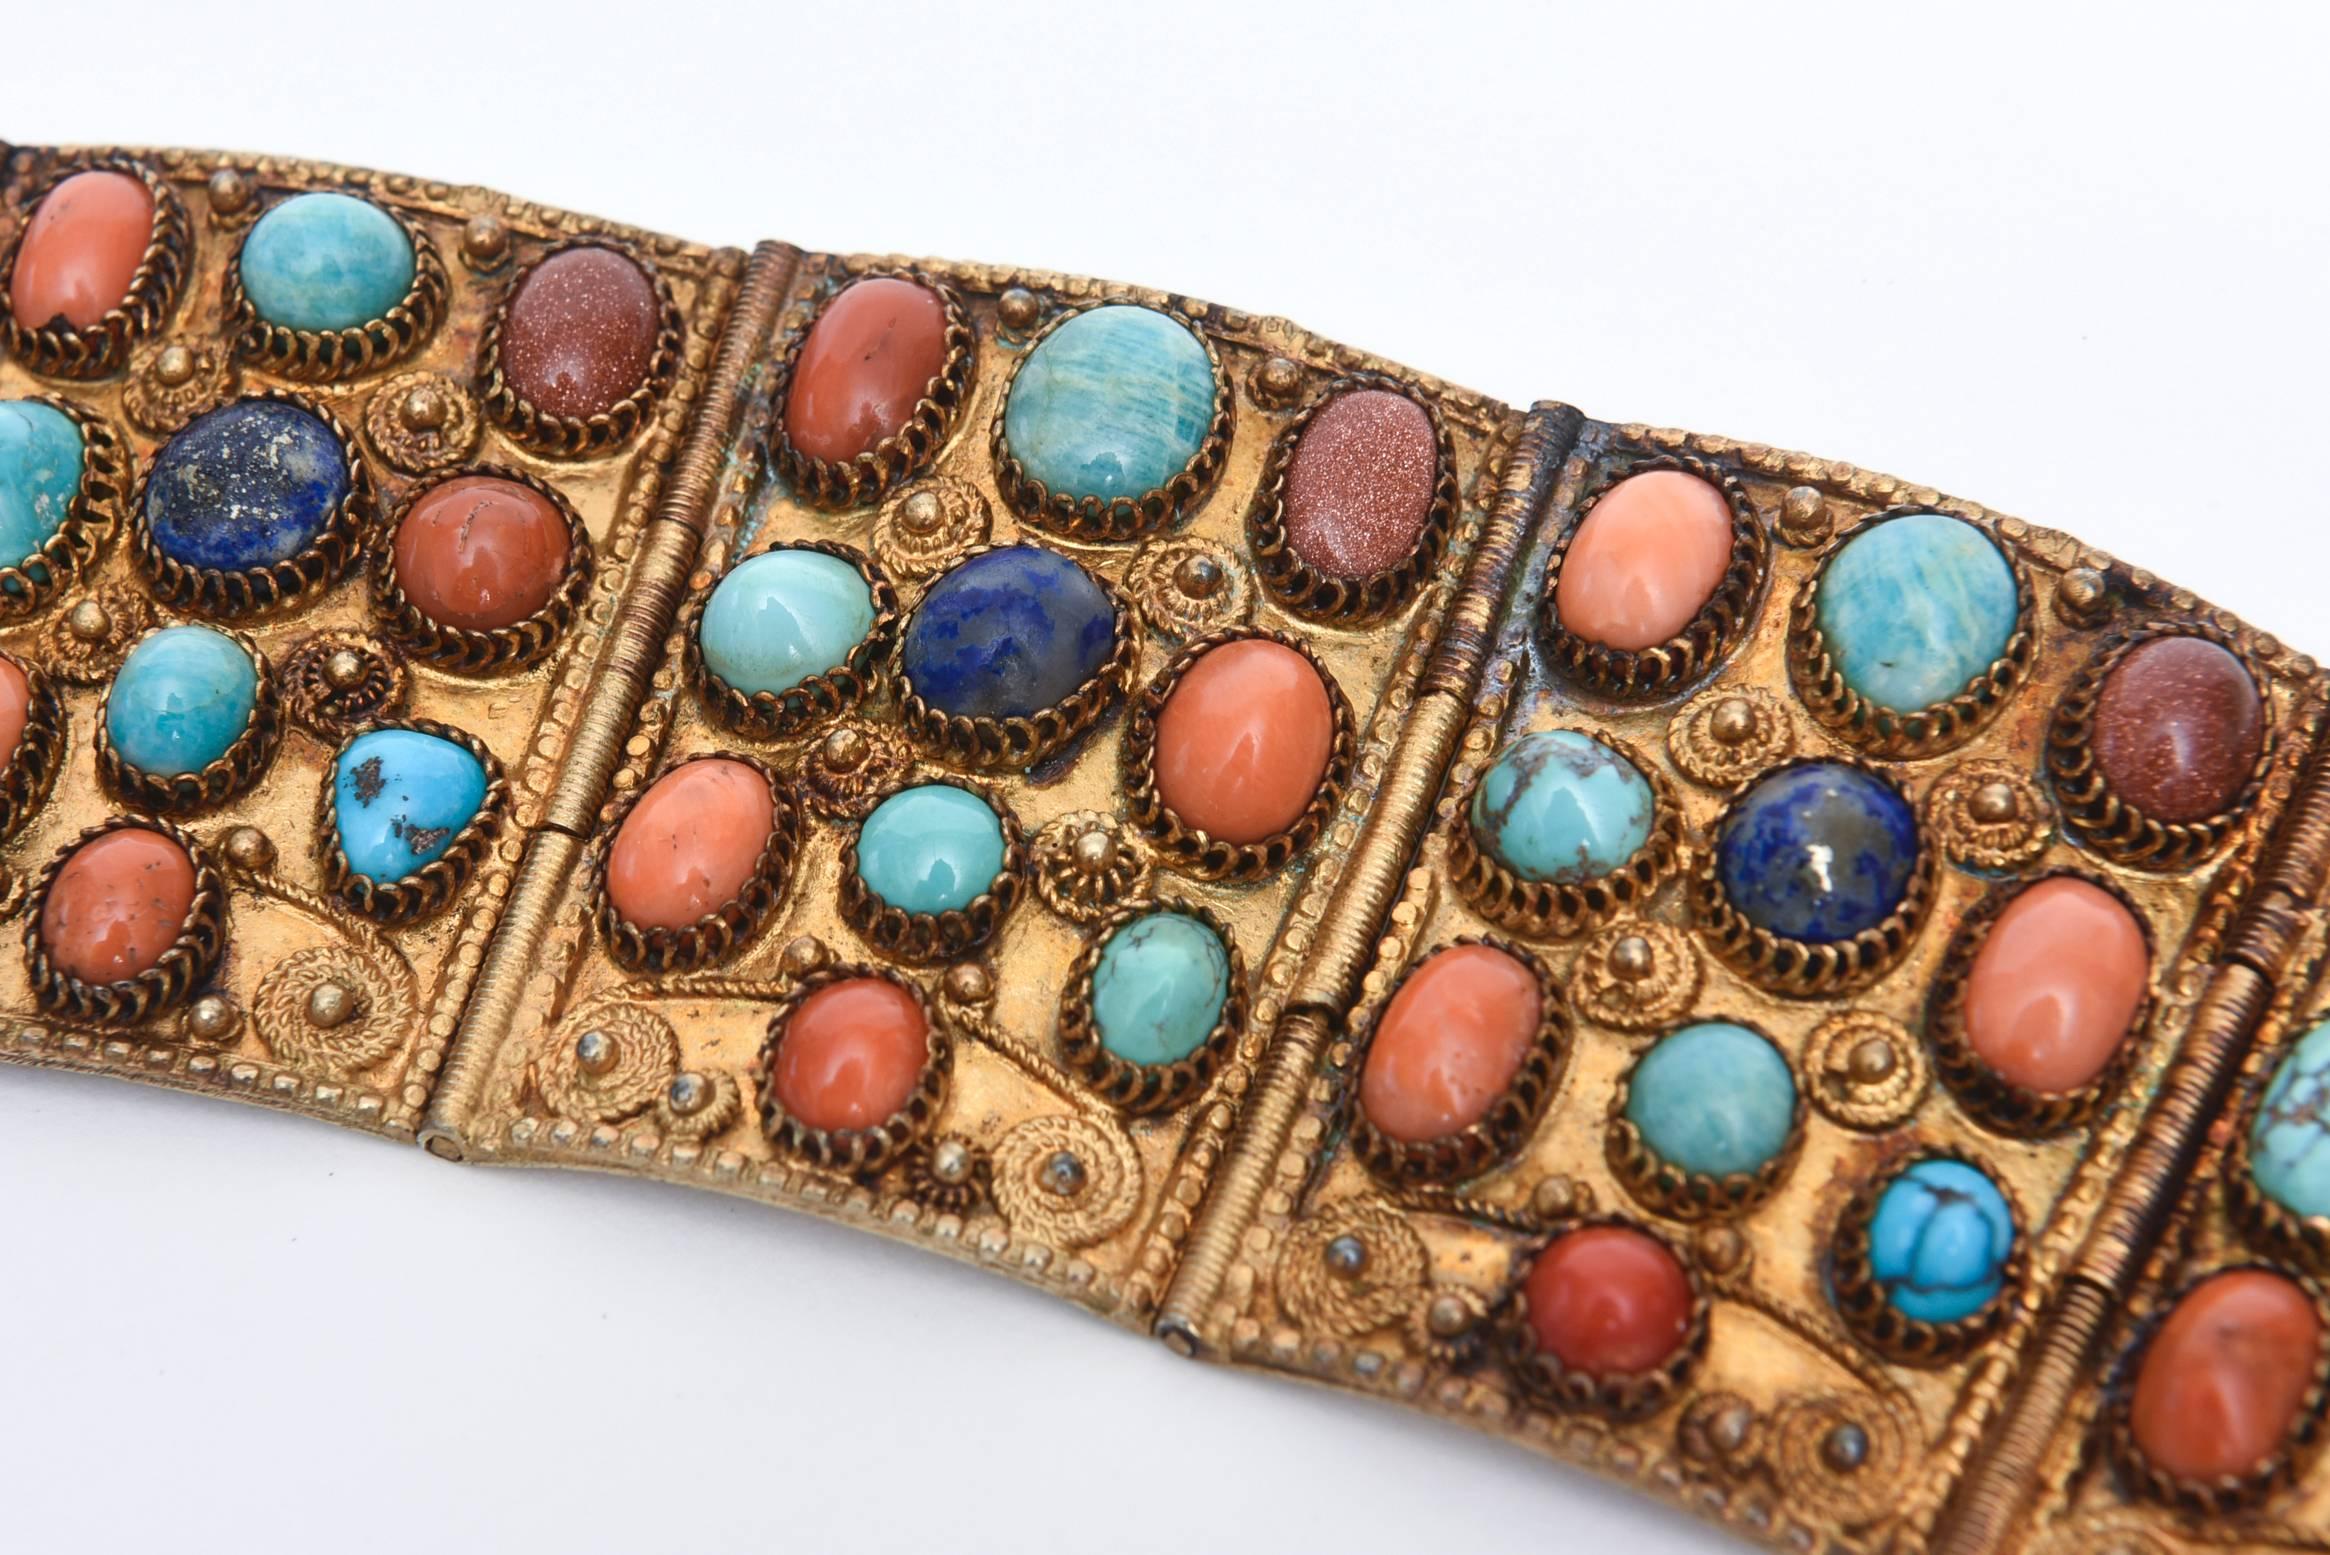  Egyptian Revival Coral, Turquoise and Lapis Vermeil Cuff Bracelet  5